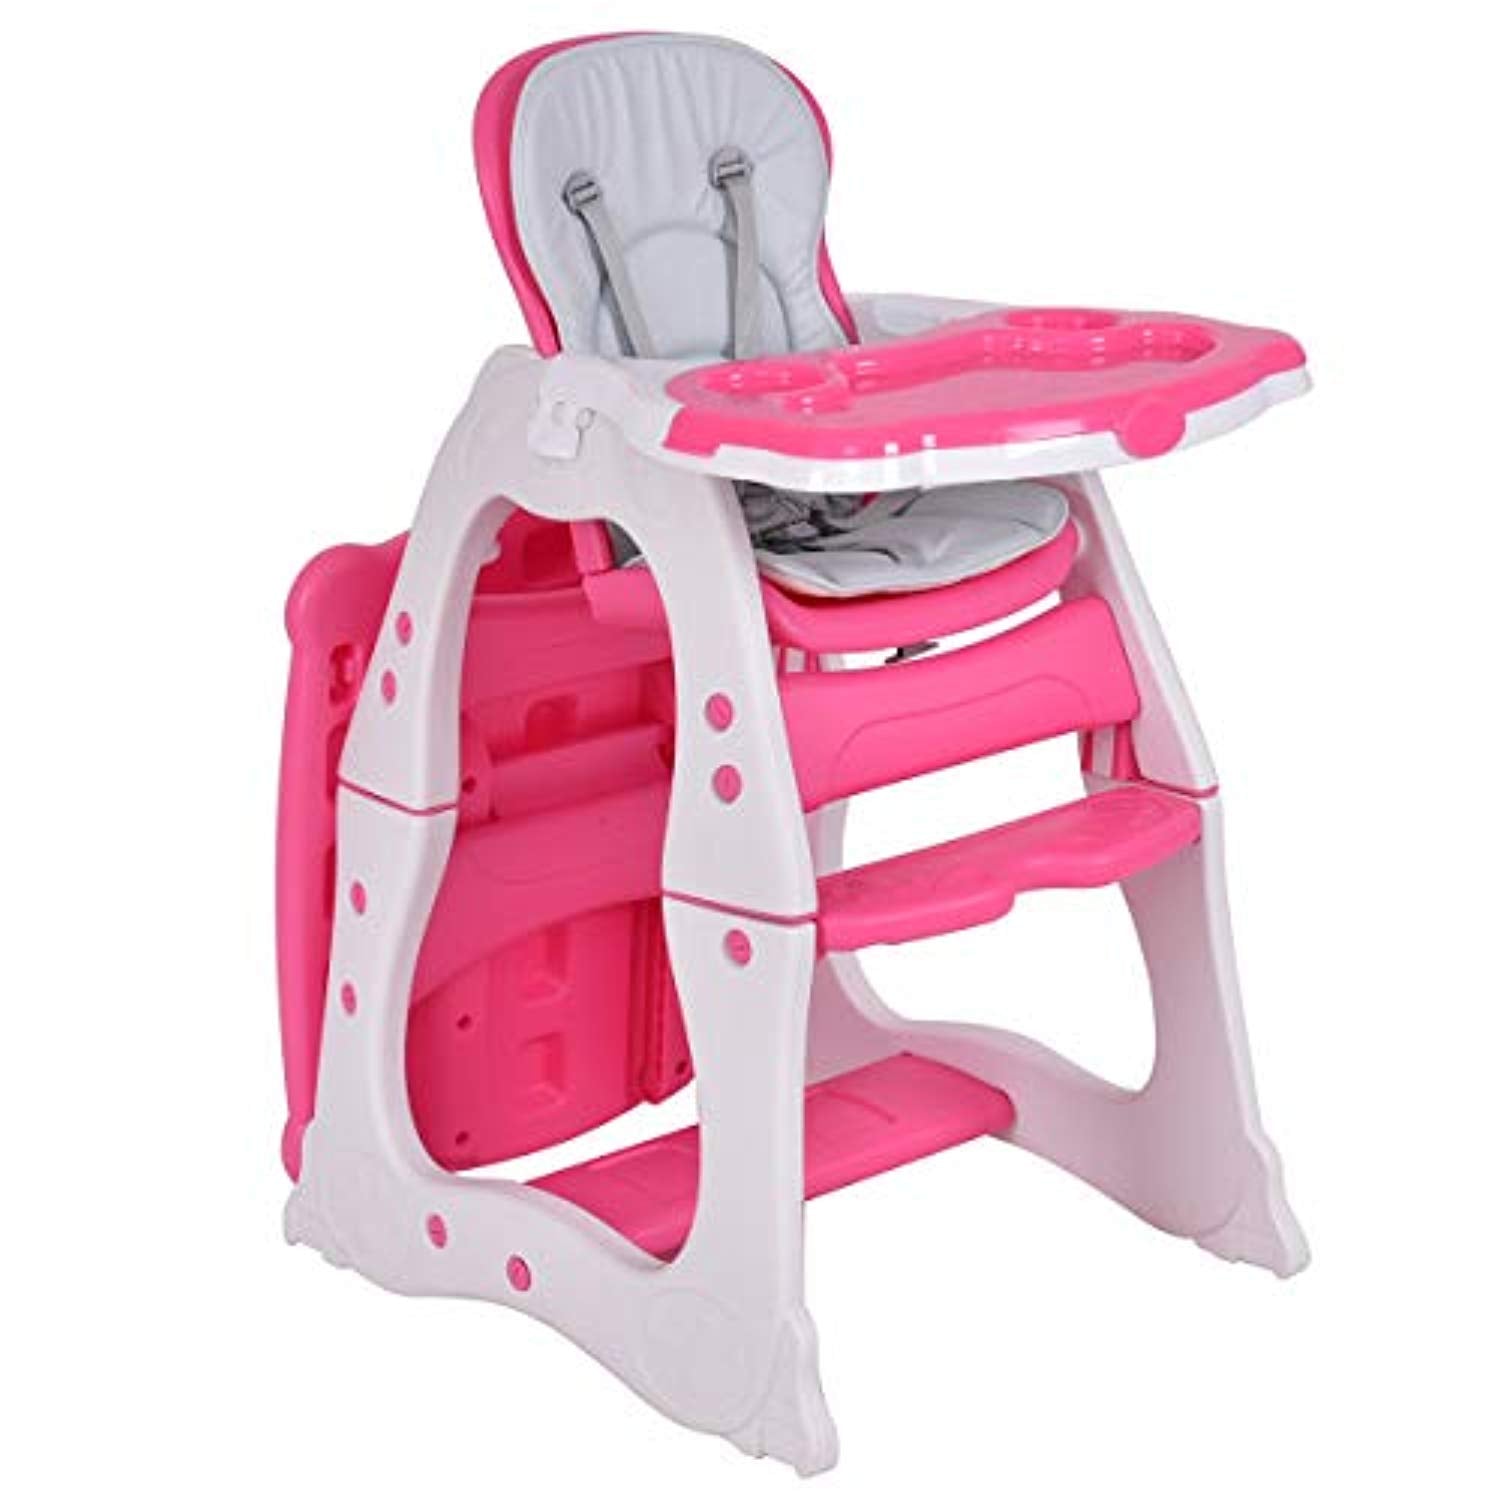 3 in 1 baby high chair